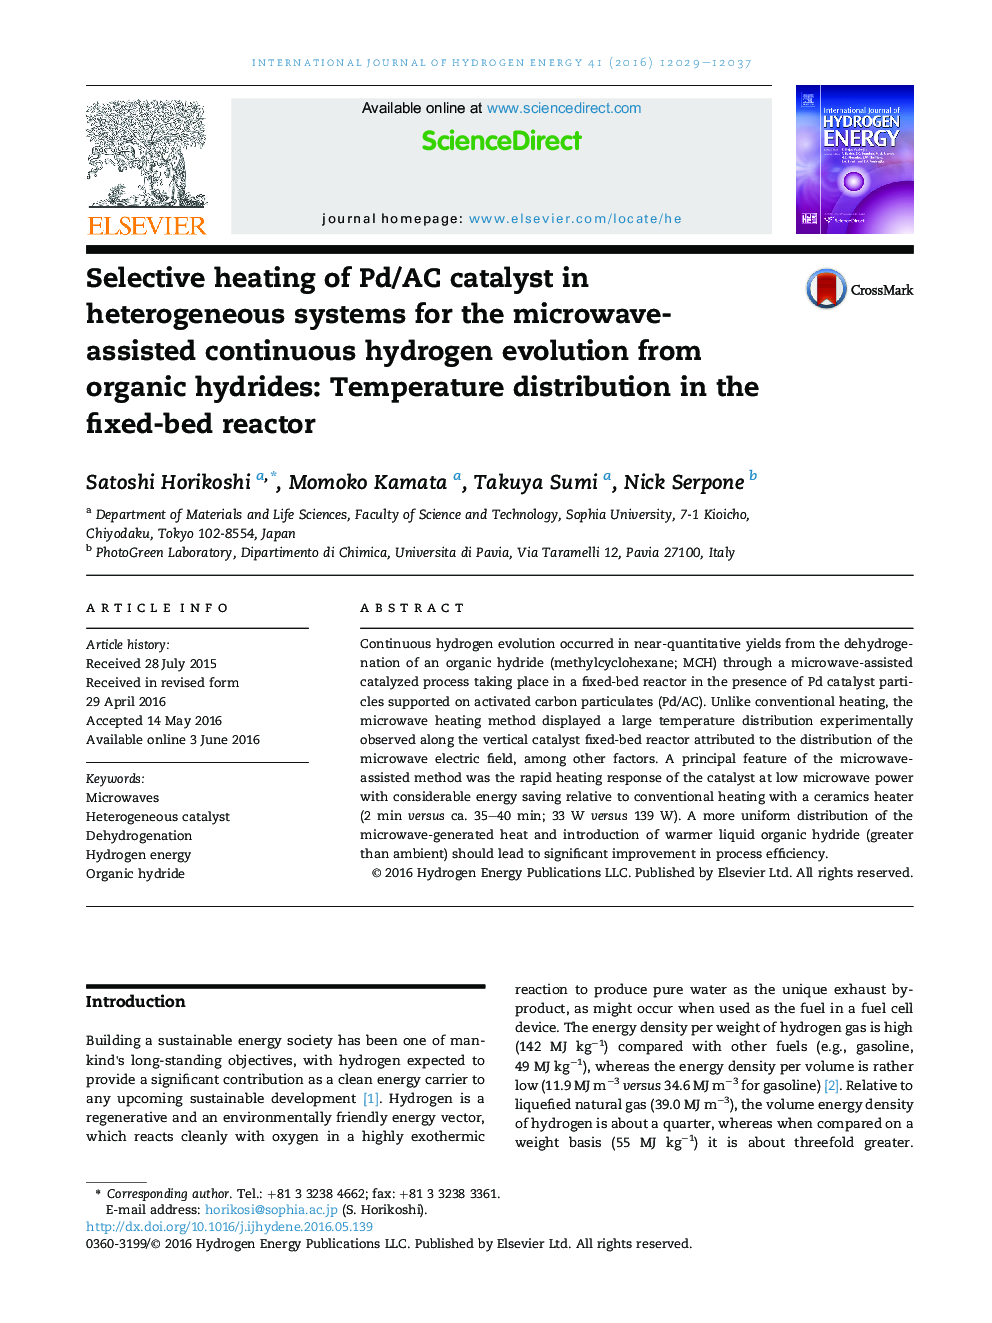 Selective heating of Pd/AC catalyst in heterogeneous systems for the microwave-assisted continuous hydrogen evolution from organic hydrides: Temperature distribution in the fixed-bed reactor